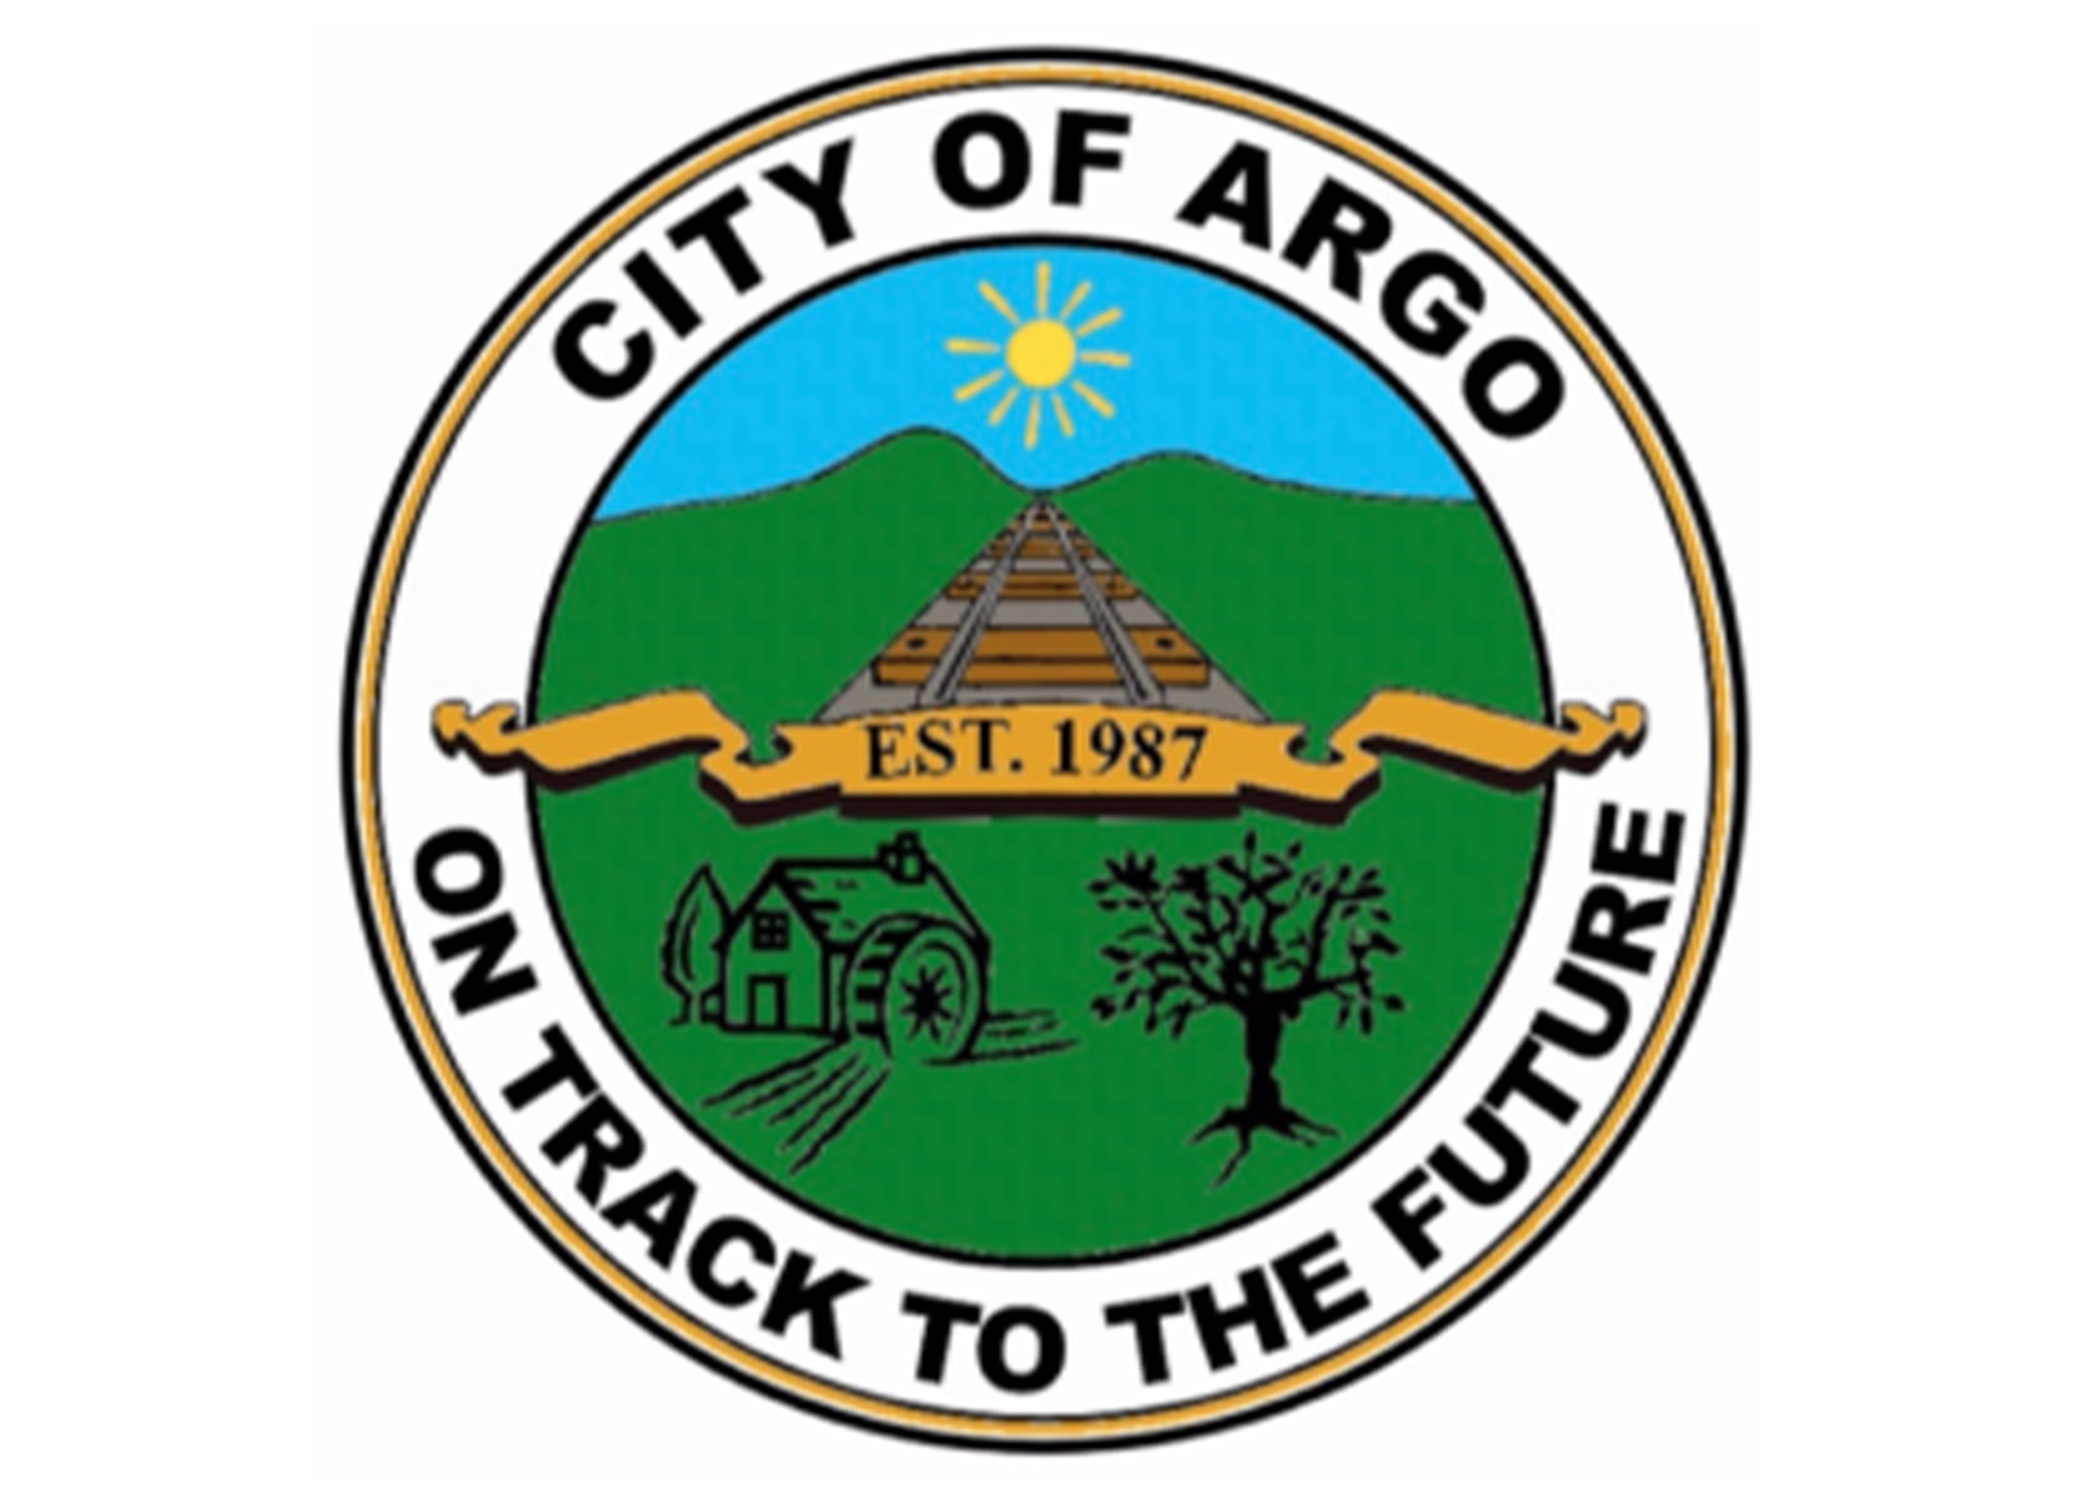 Argo Council introduces candidates for zoning board, hears road complaints